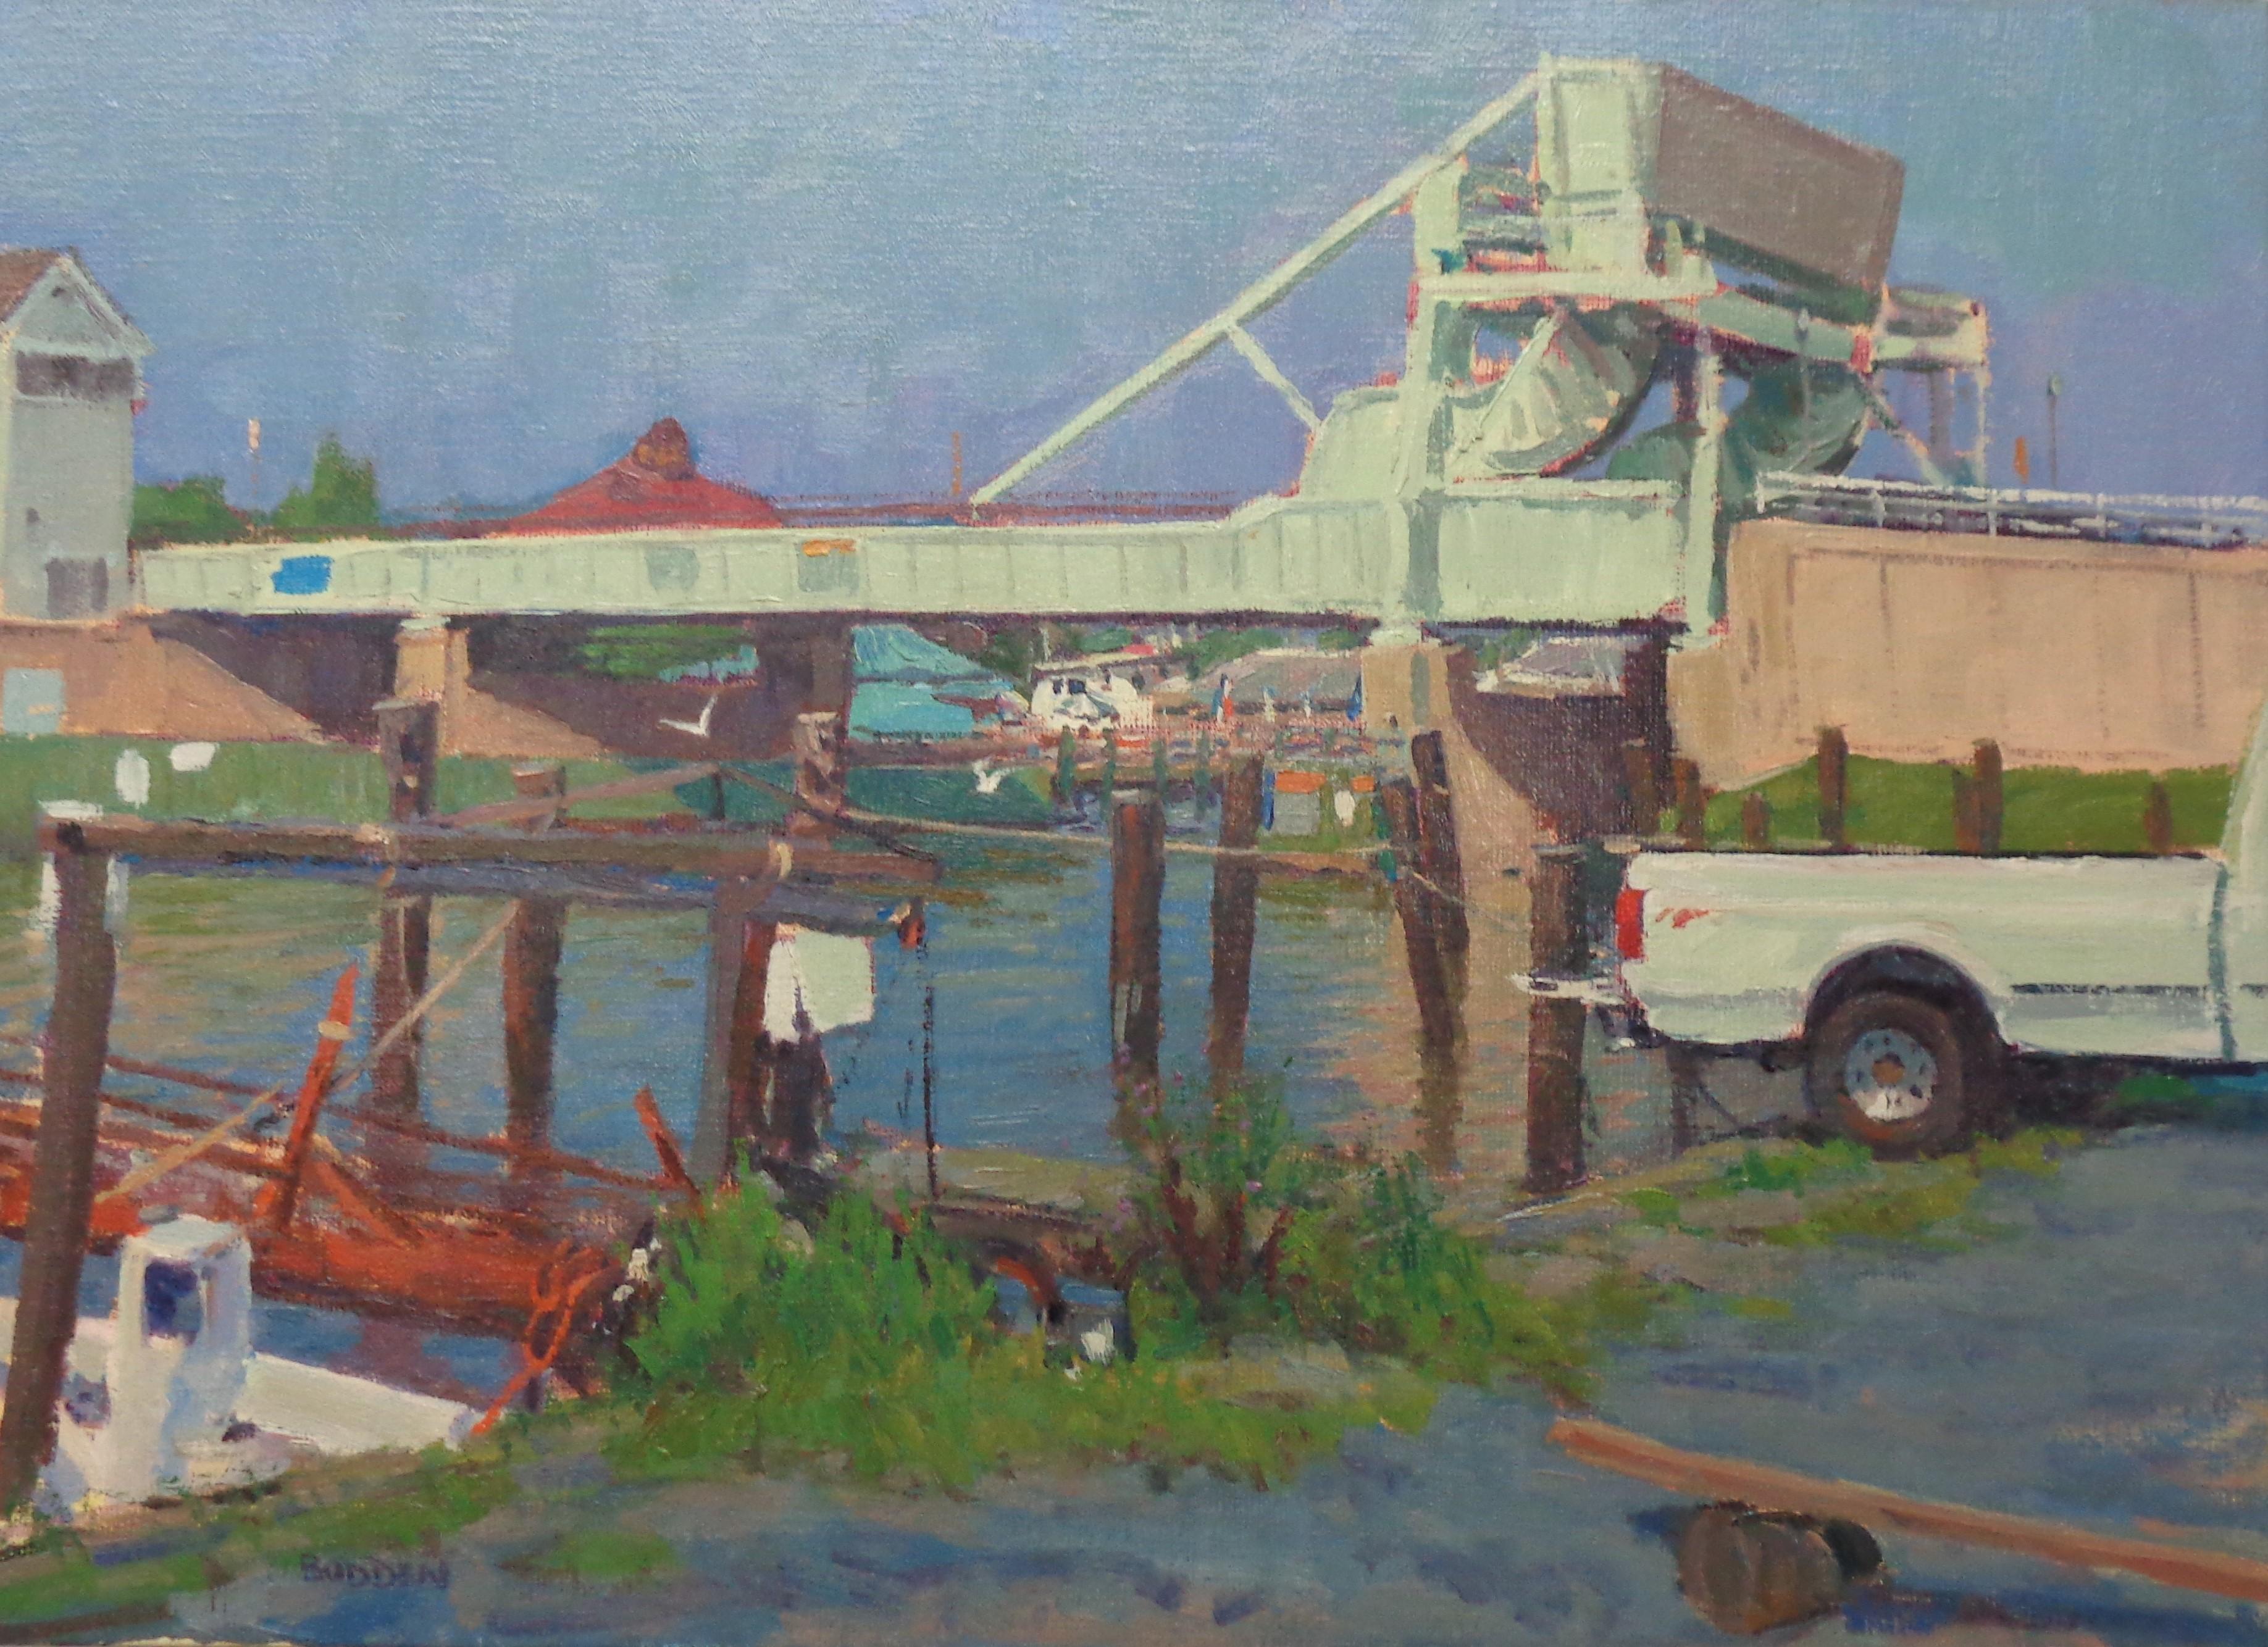 Tilghman Island Marina is a beautiful  oil painting on canvas by award winning contemporary artist Michael Budden that displays the very essence of plein air painting . This painting has been in the artists collection since painted on location in